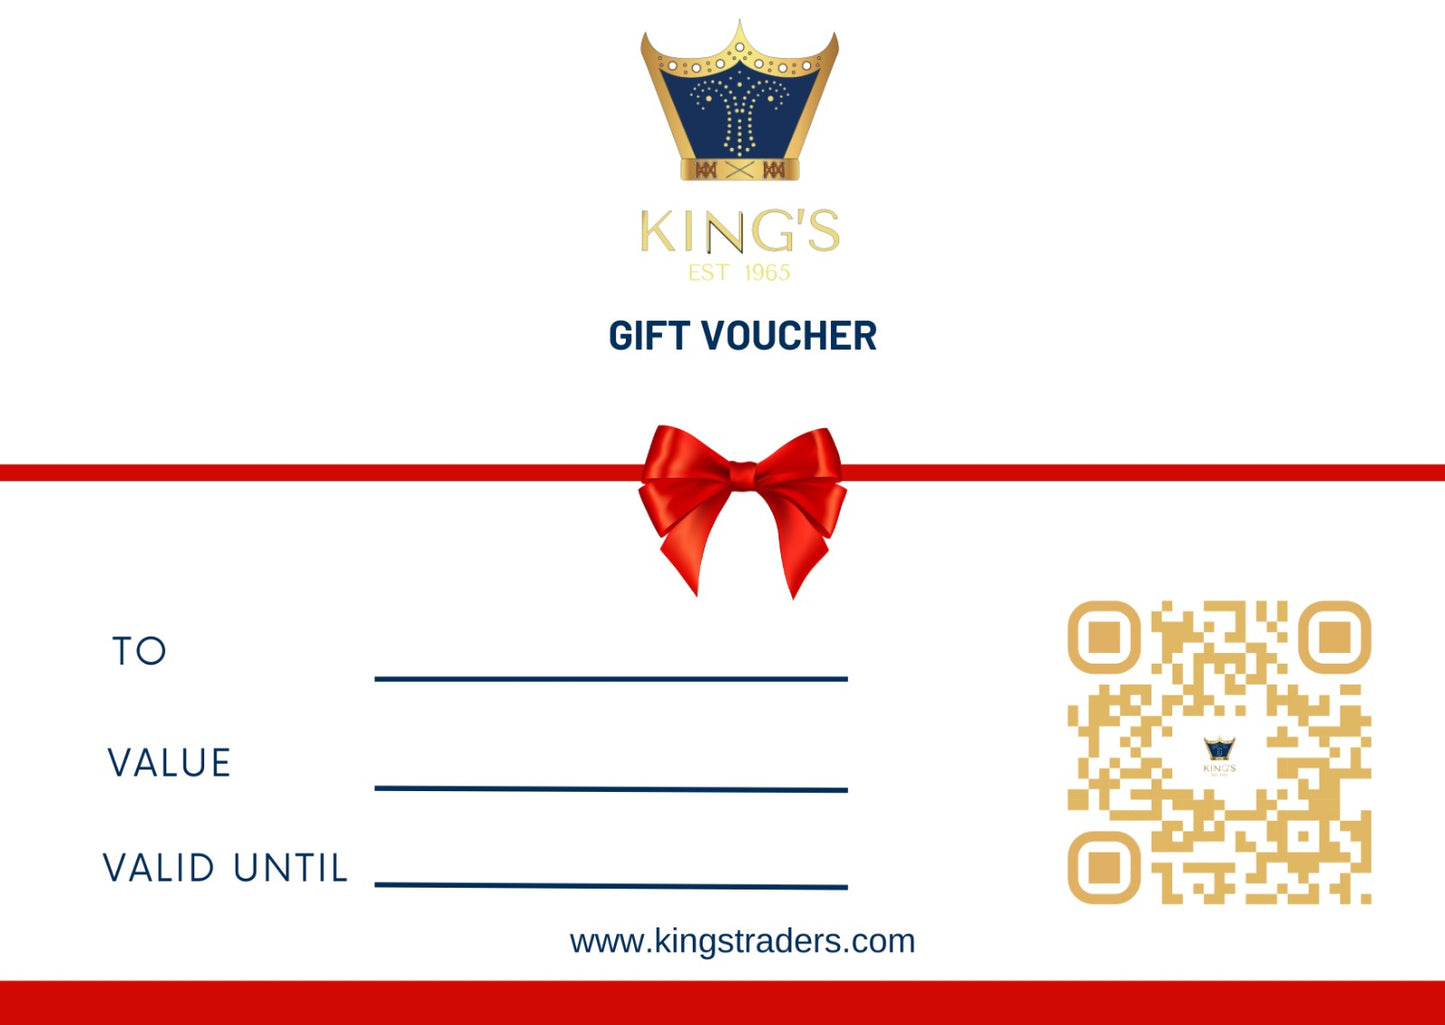 King's Gift Card - KING'S